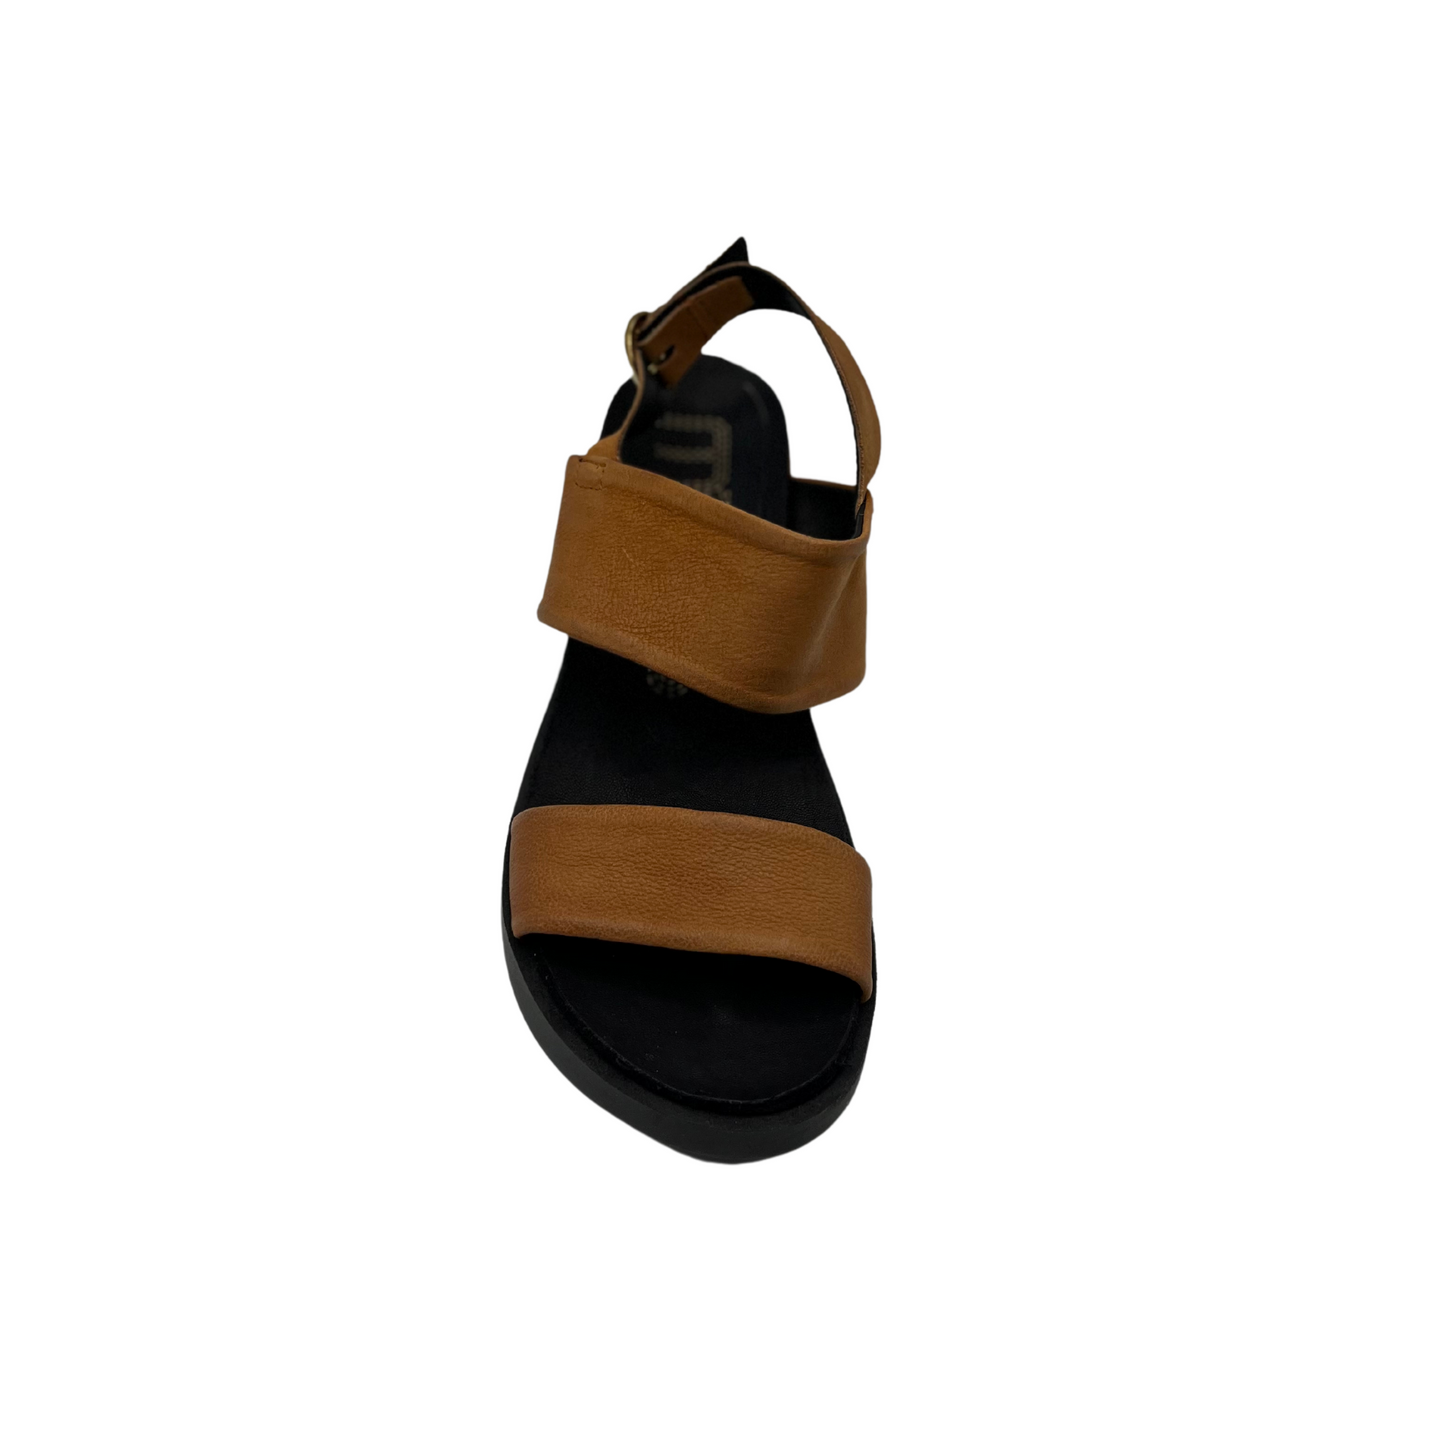 Front View of the Mjus Tippa leather sandal made in Italy.